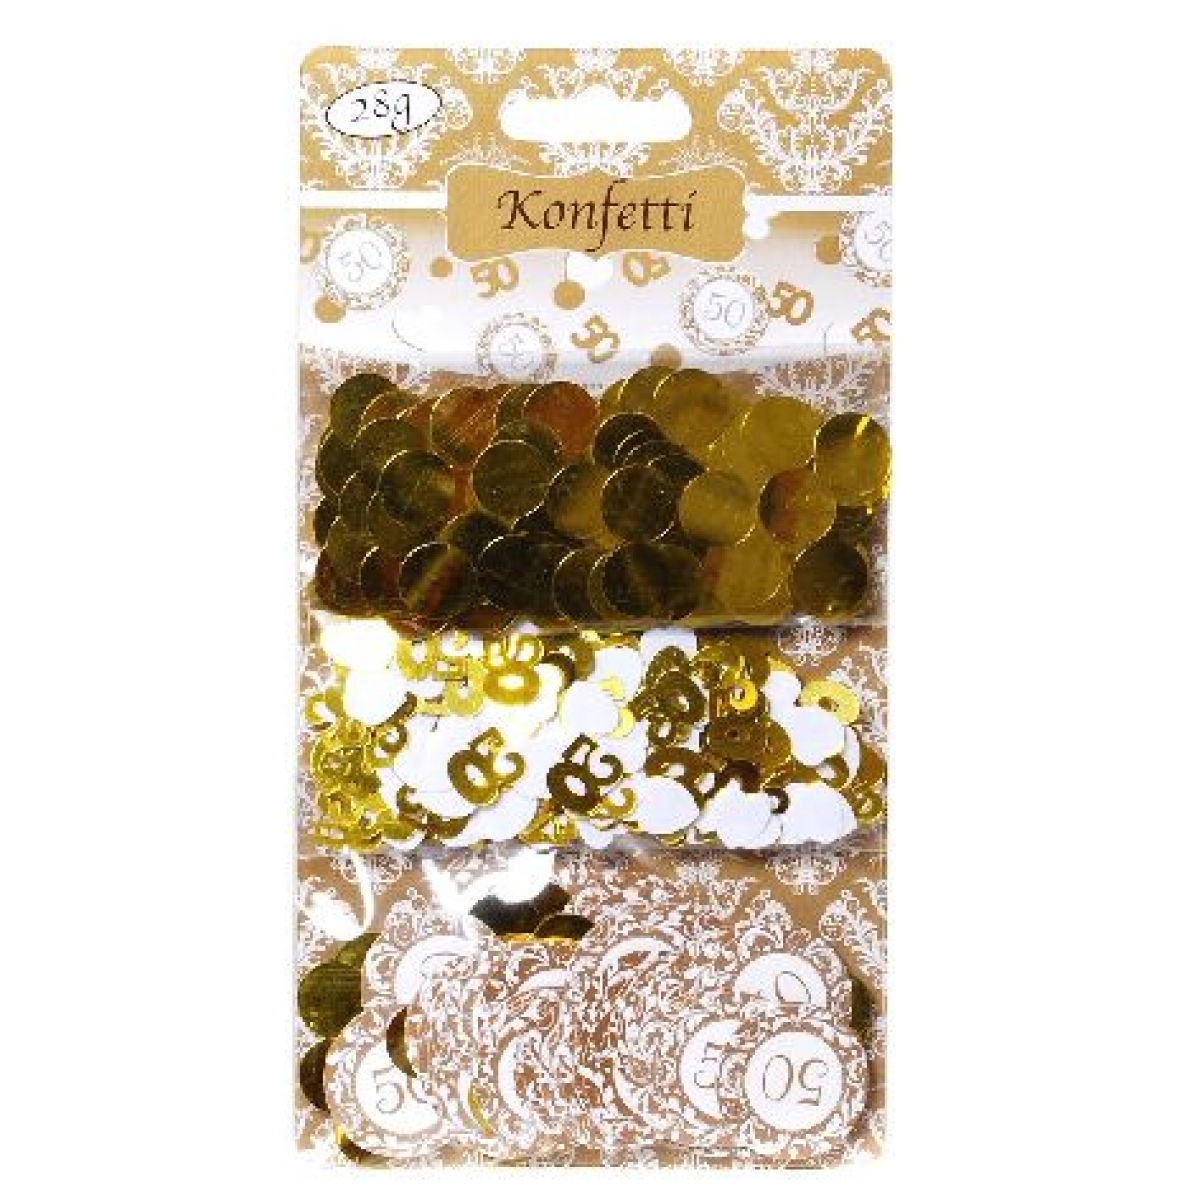 Udo SchmidtConfetti Metallic set of 3 28gr gold with number 50 10463Article-No: 4012221104630